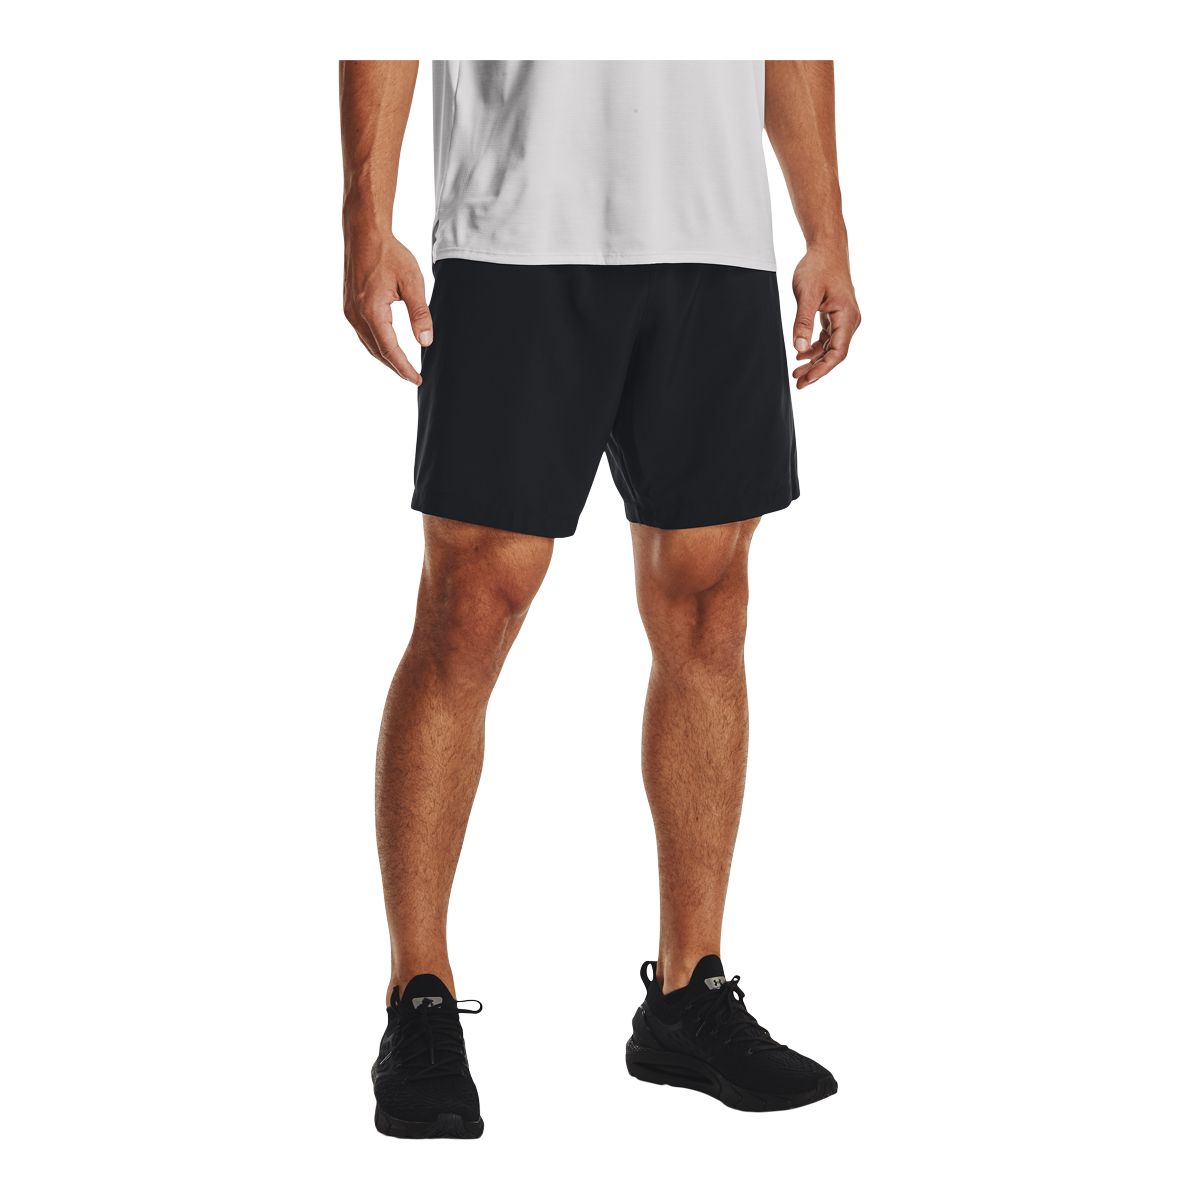 Under Armour Men's Woven Graphic 8" Shorts  Loose/Relaxed Fit Gym Drawstring Lightweight